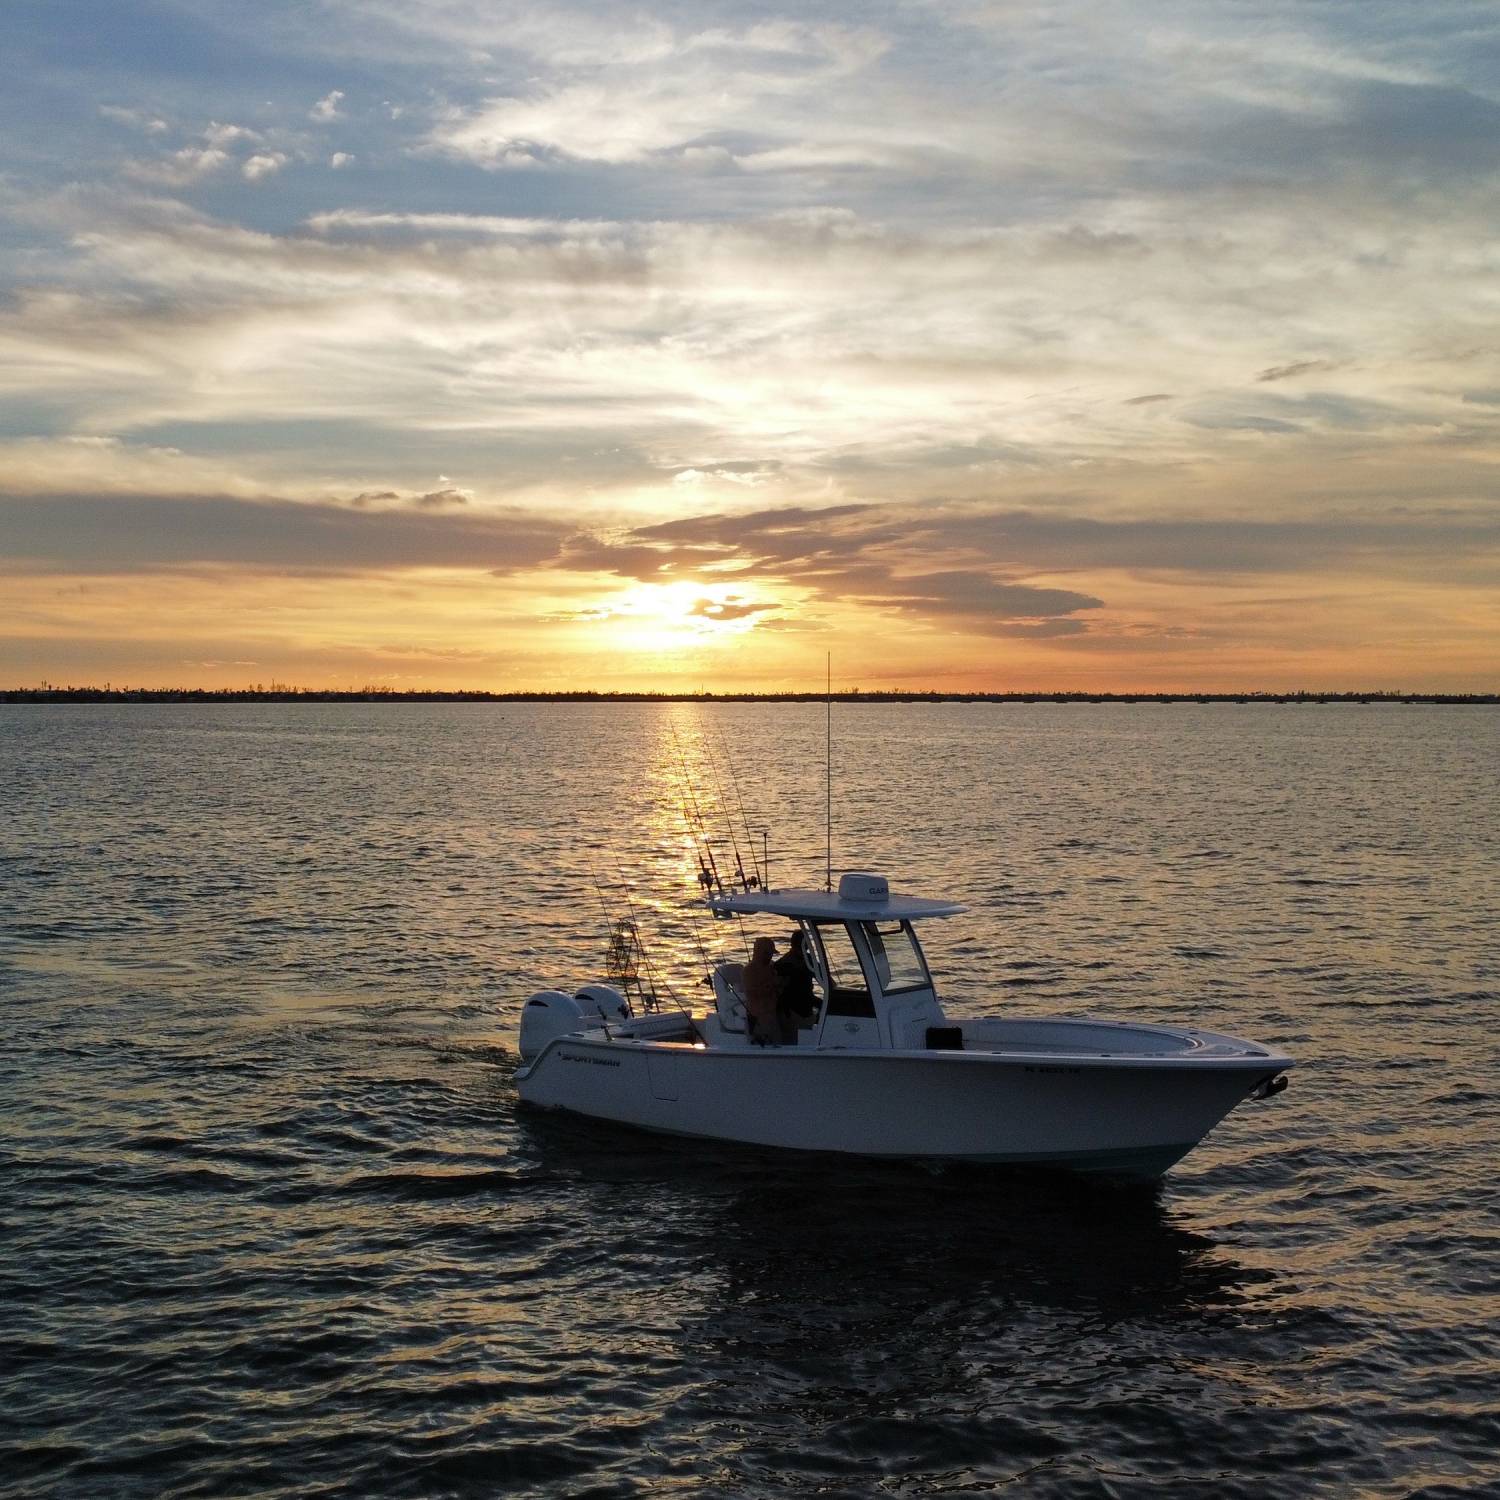 Title: Sunset Open 262 - On board their Sportsman Open 262 Center Console - Location: Sanibel, FL. Participating in the Photo Contest #SportsmanFebruary2023